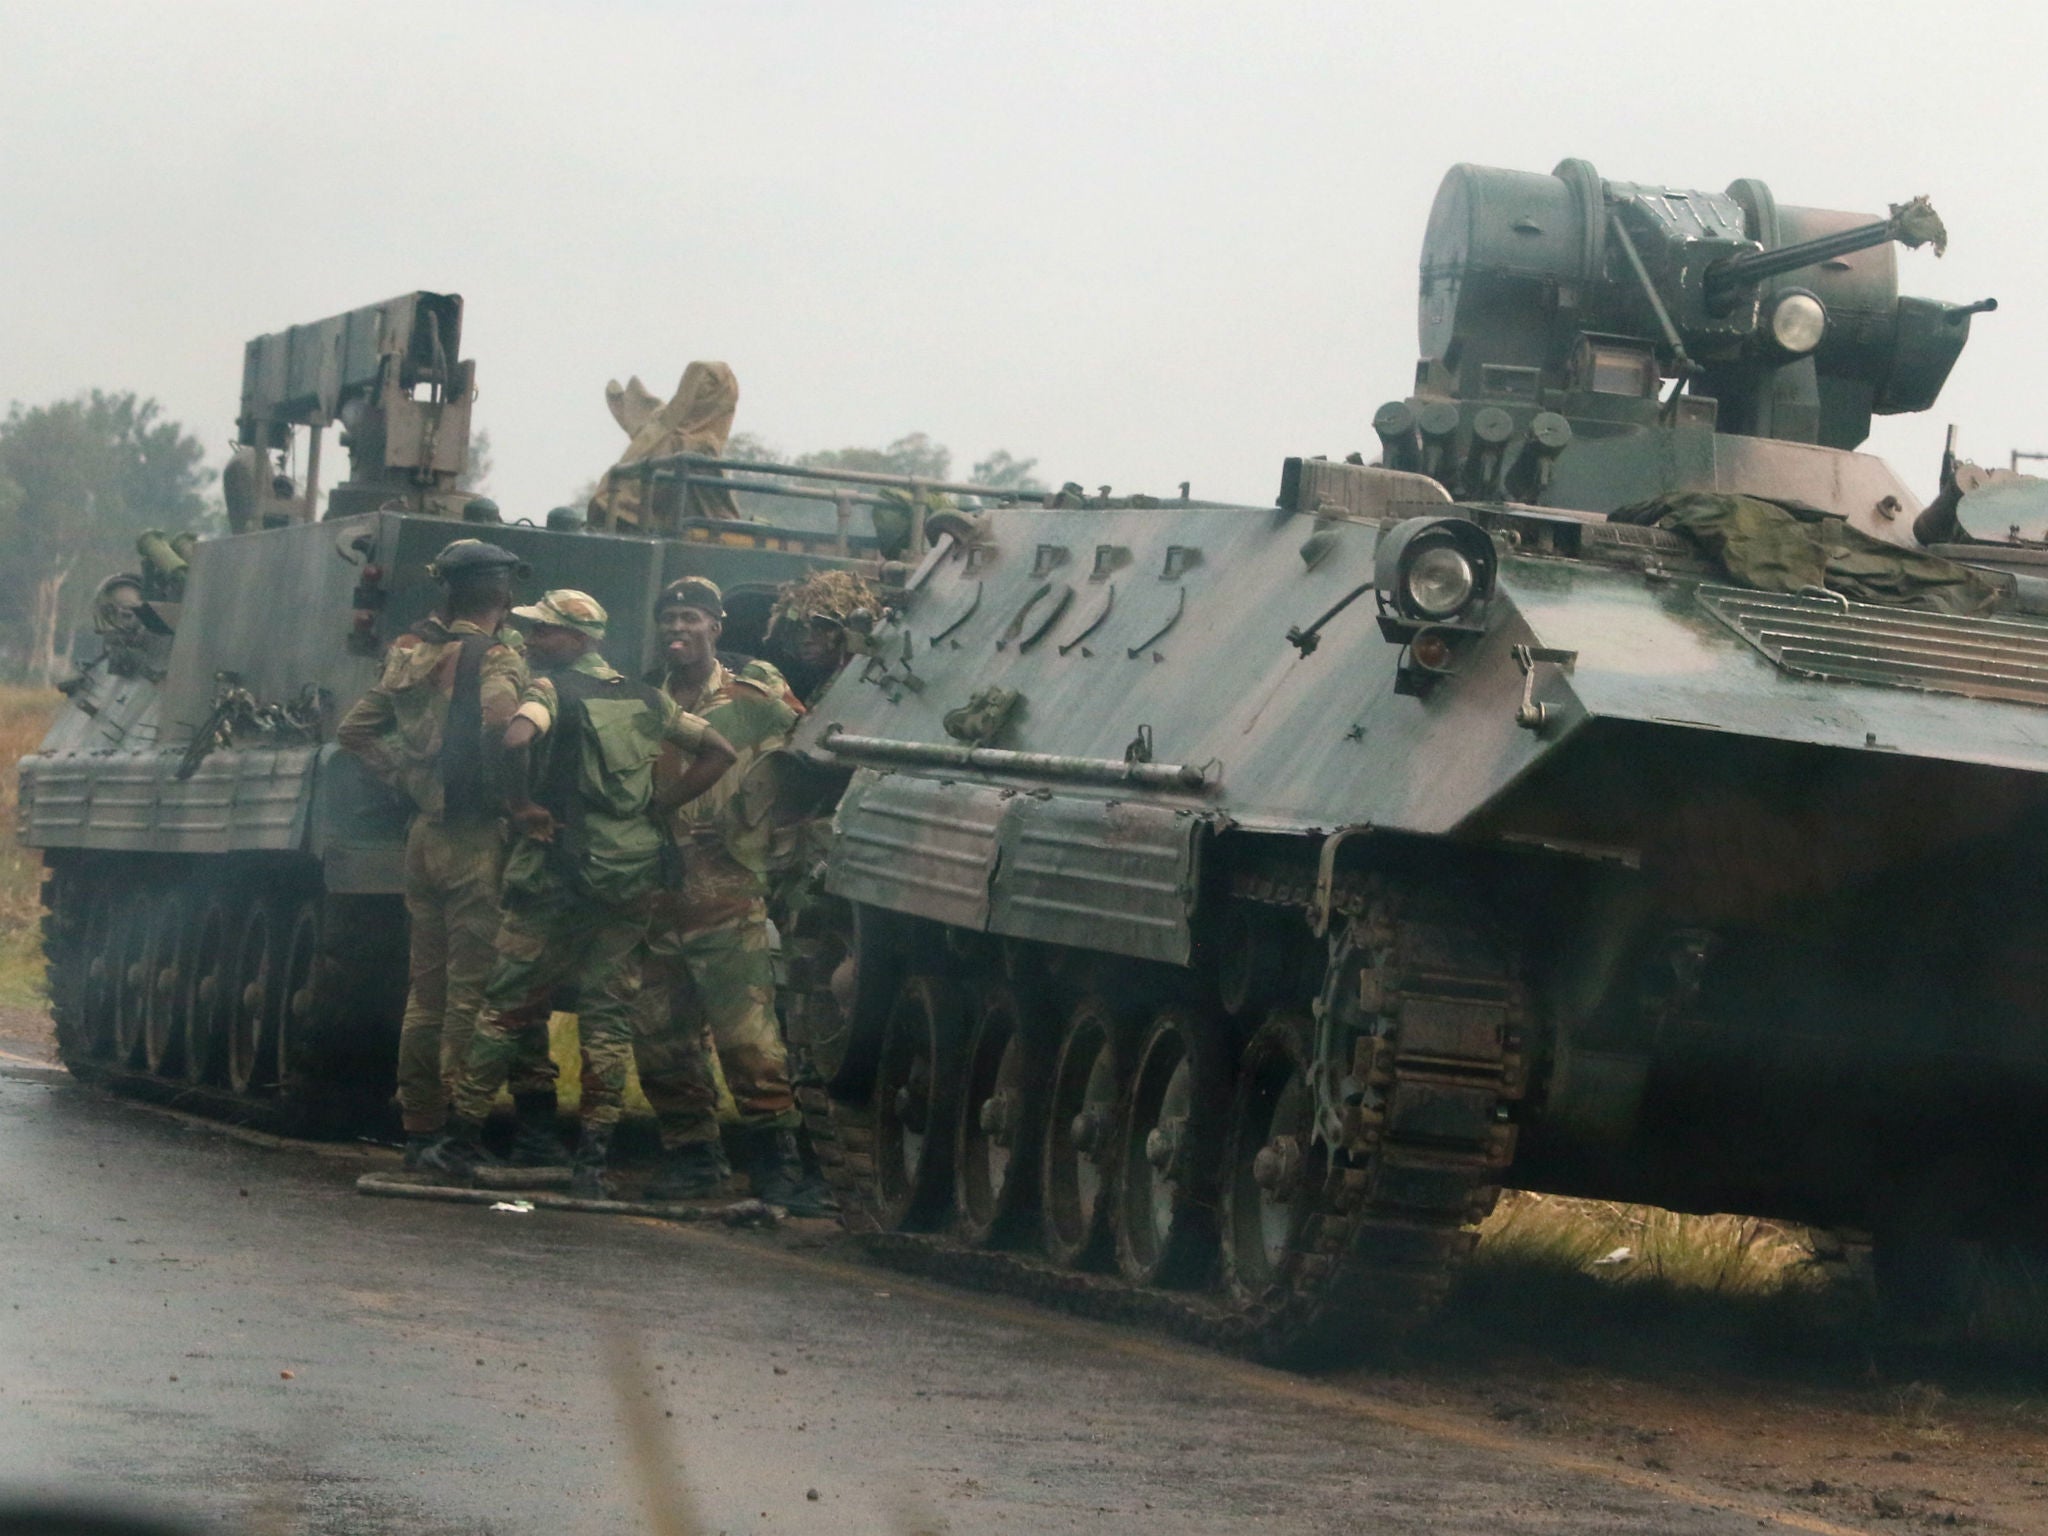 Soldiers stand beside military vehicles just outside Harare, Zimbabwe on November 14, 2017